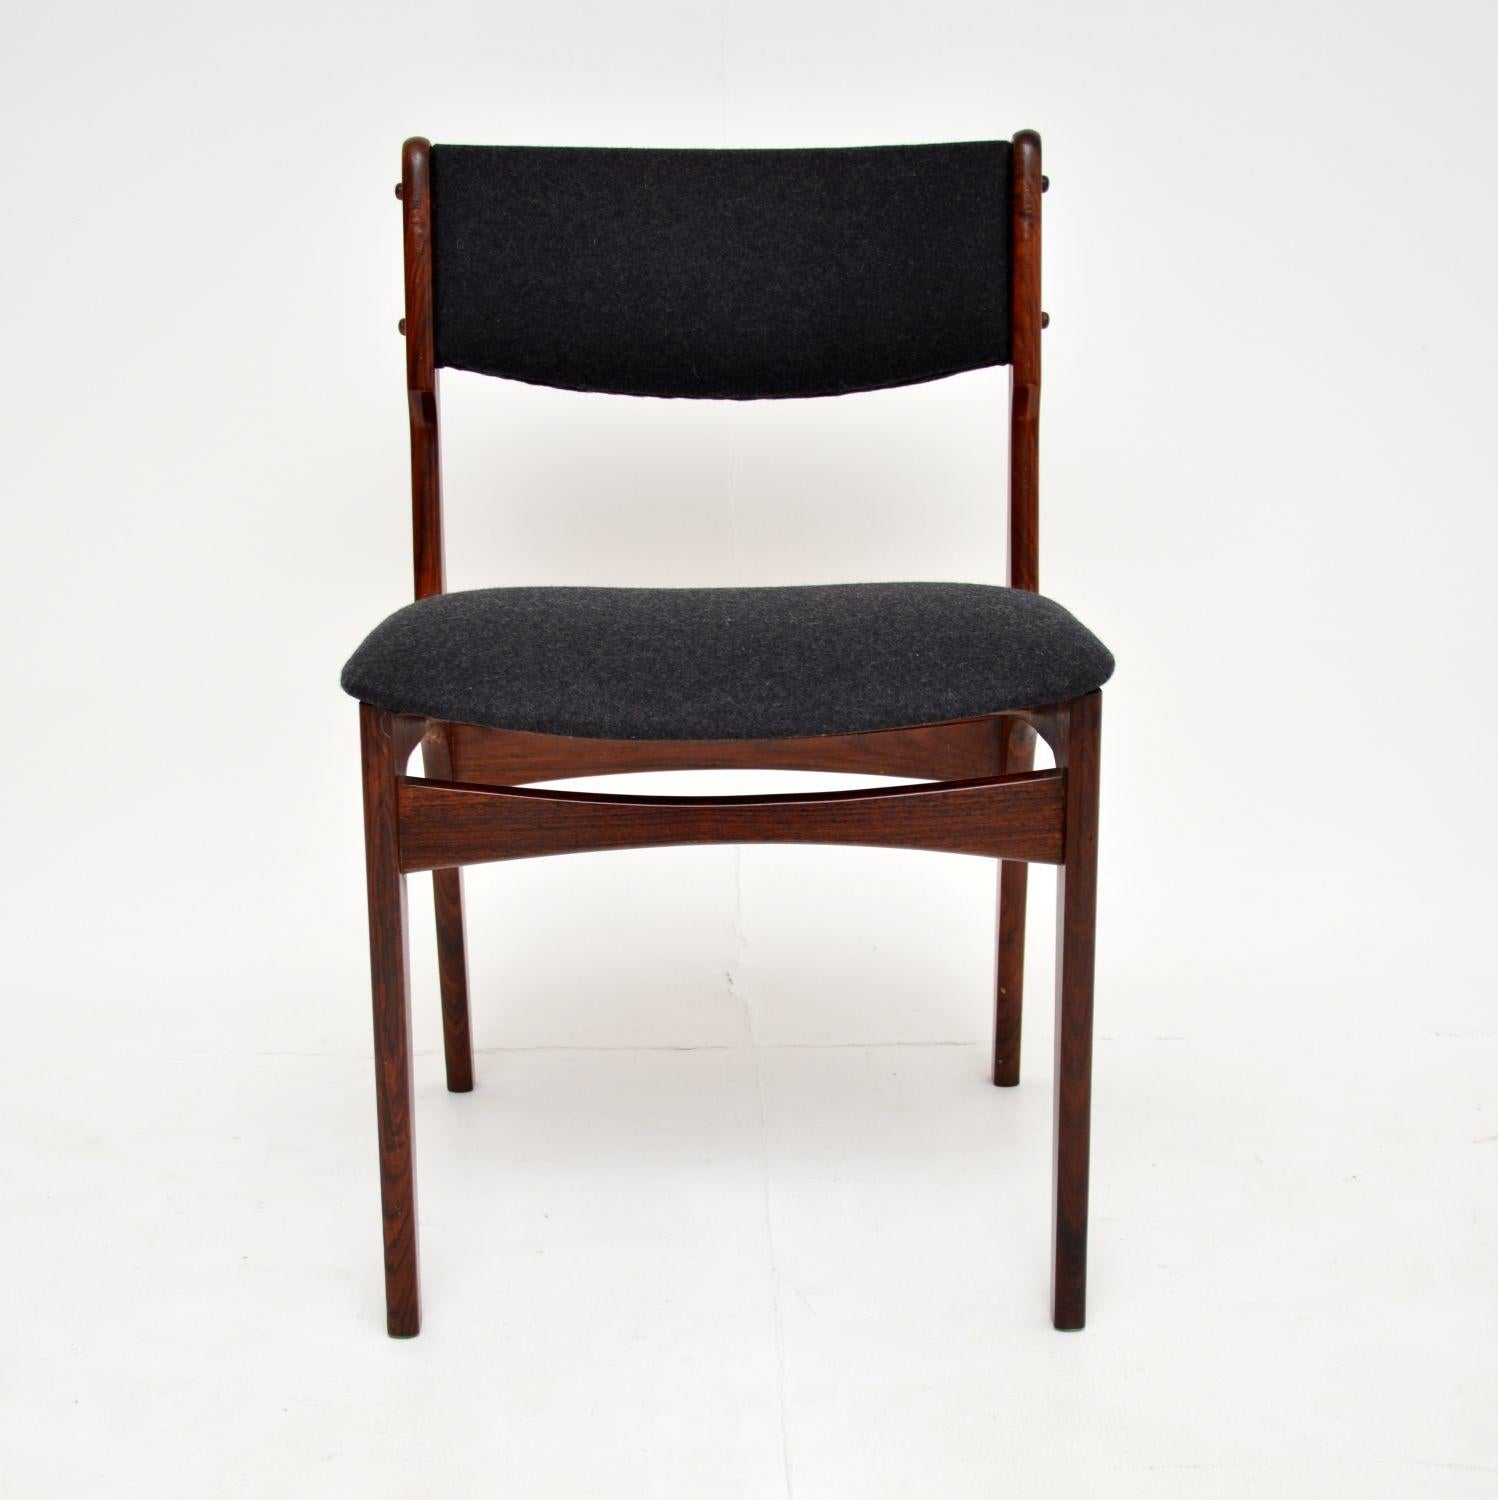 A stylish and extremely well made Danish chair in. This was designed by Erik Buch, it was made in Denmark in the 1960’s.

They quality is superb, this is very well built, comfortable and supportive. Is is perfect for use as a desk chair, accent